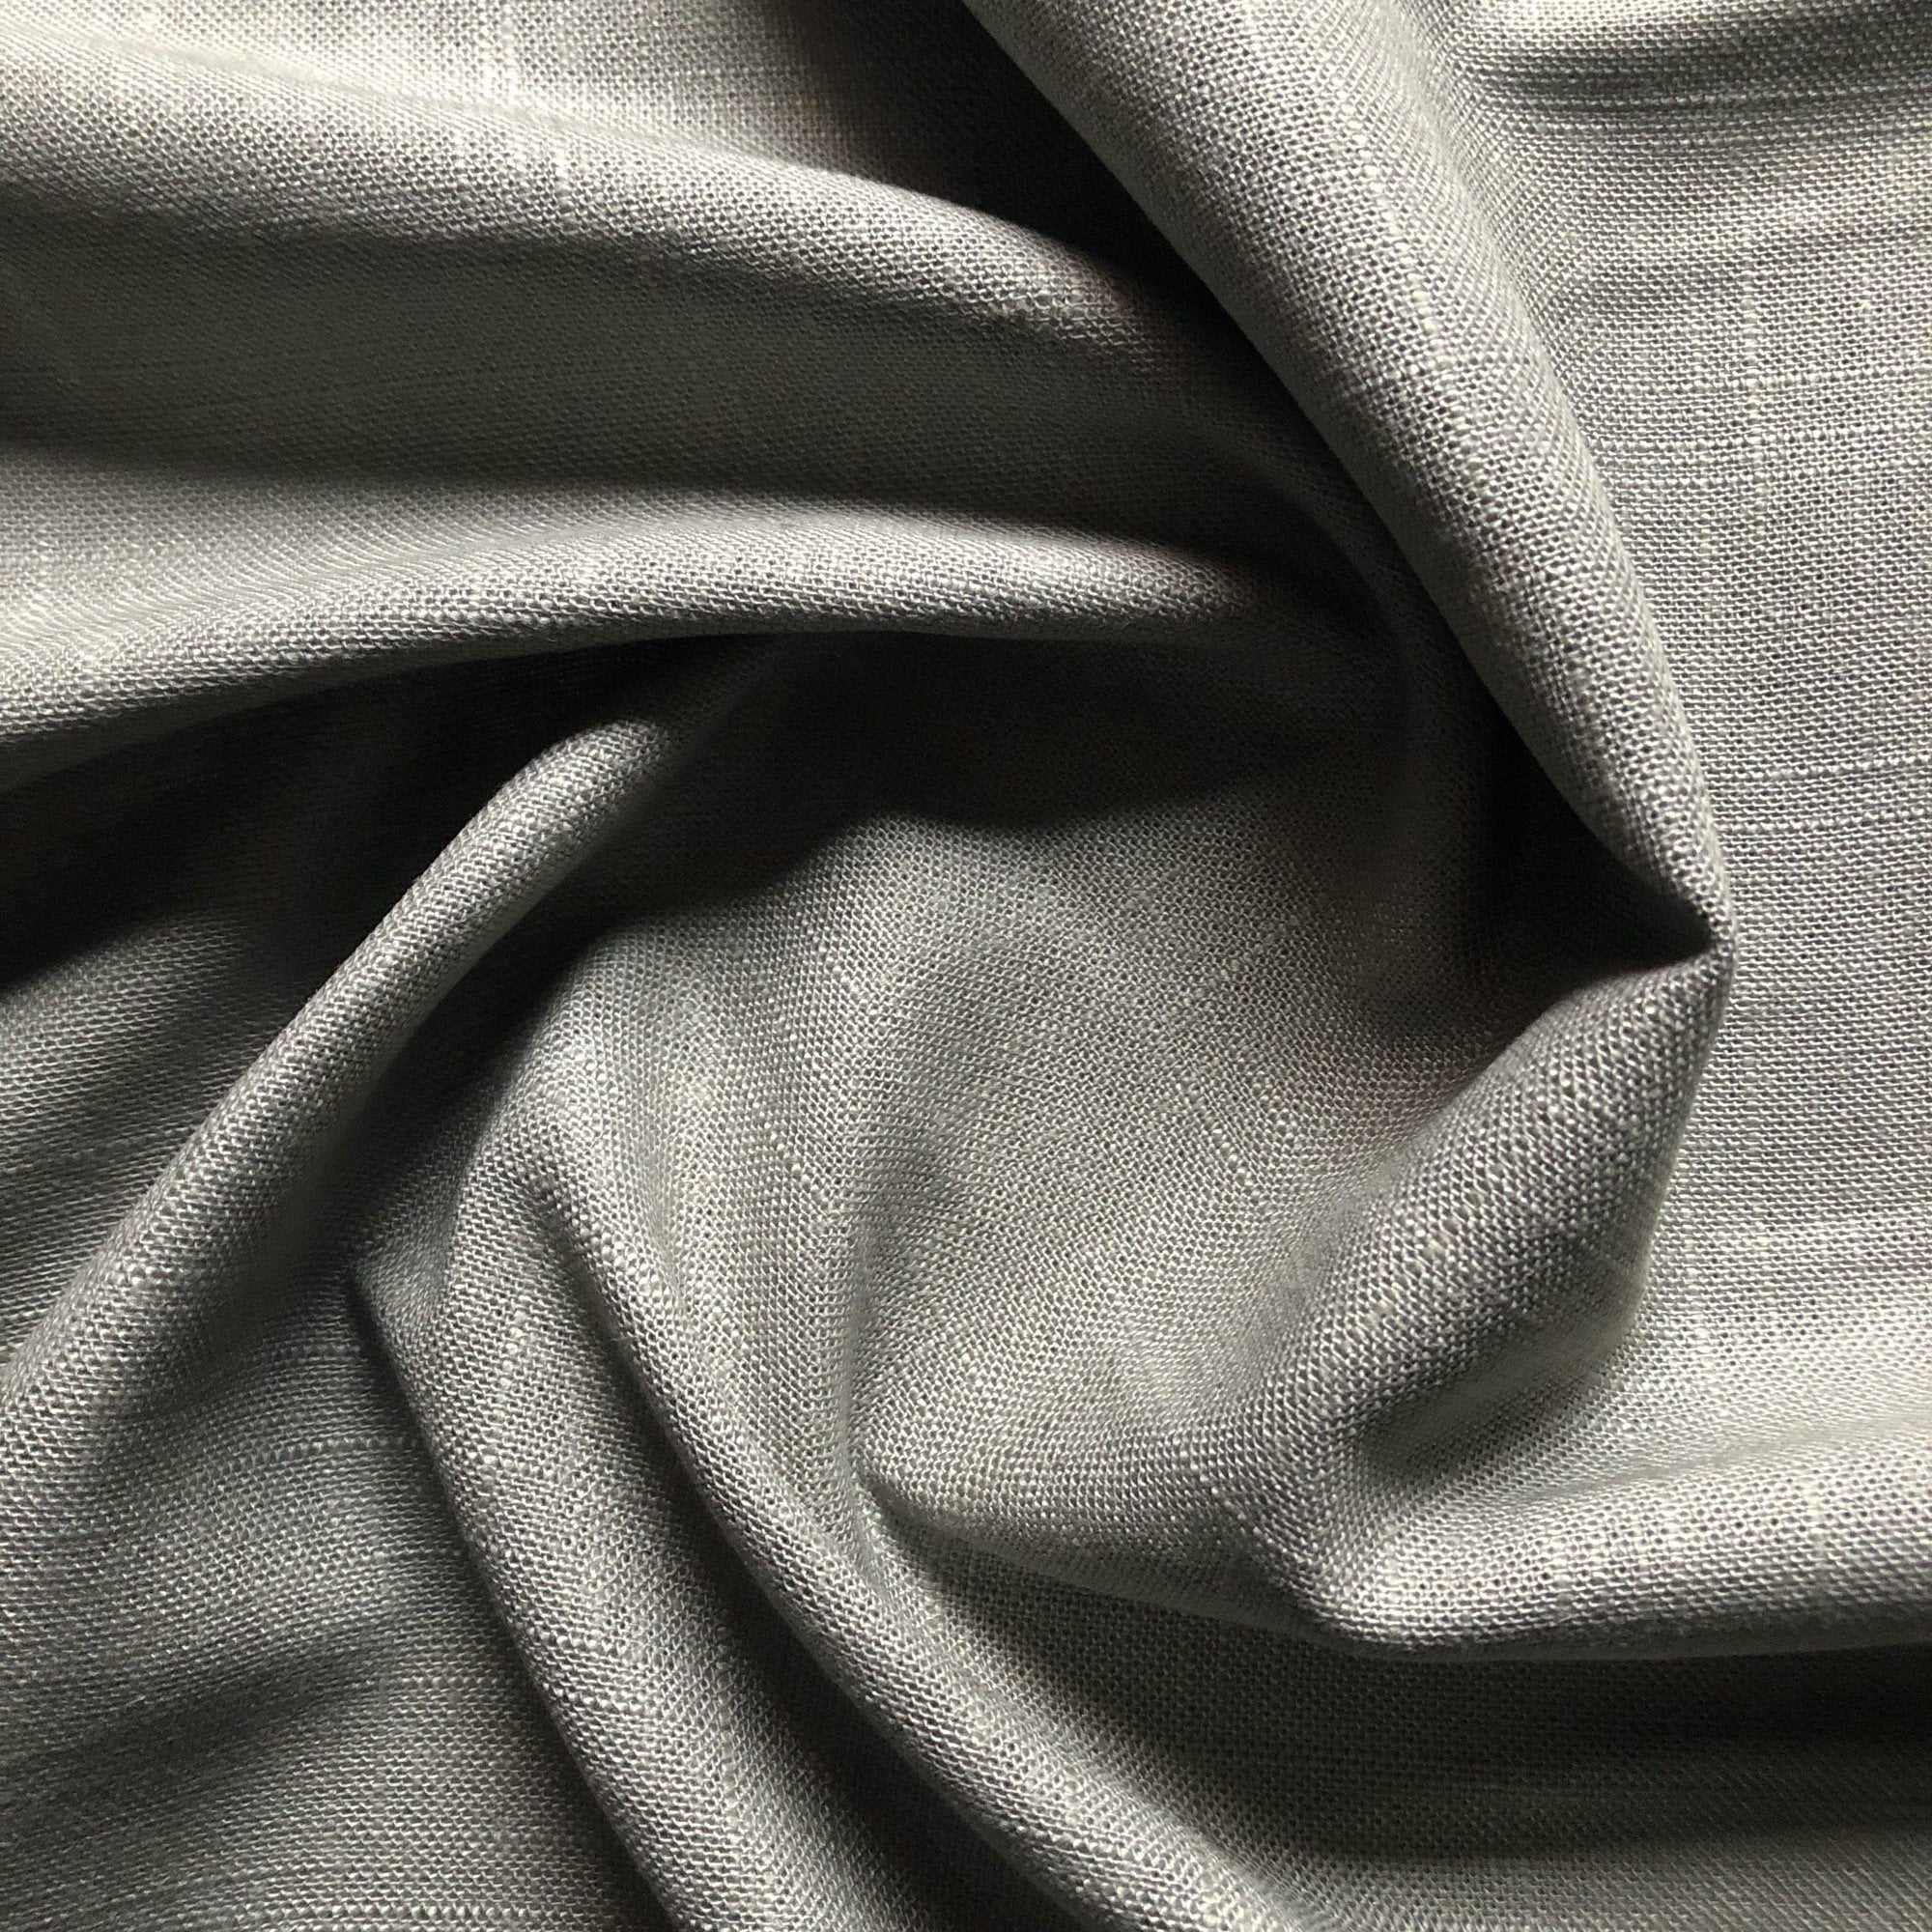 Variegated Dark Grey Woven | Upholstery Fabric | 54 Wide | By the Yard